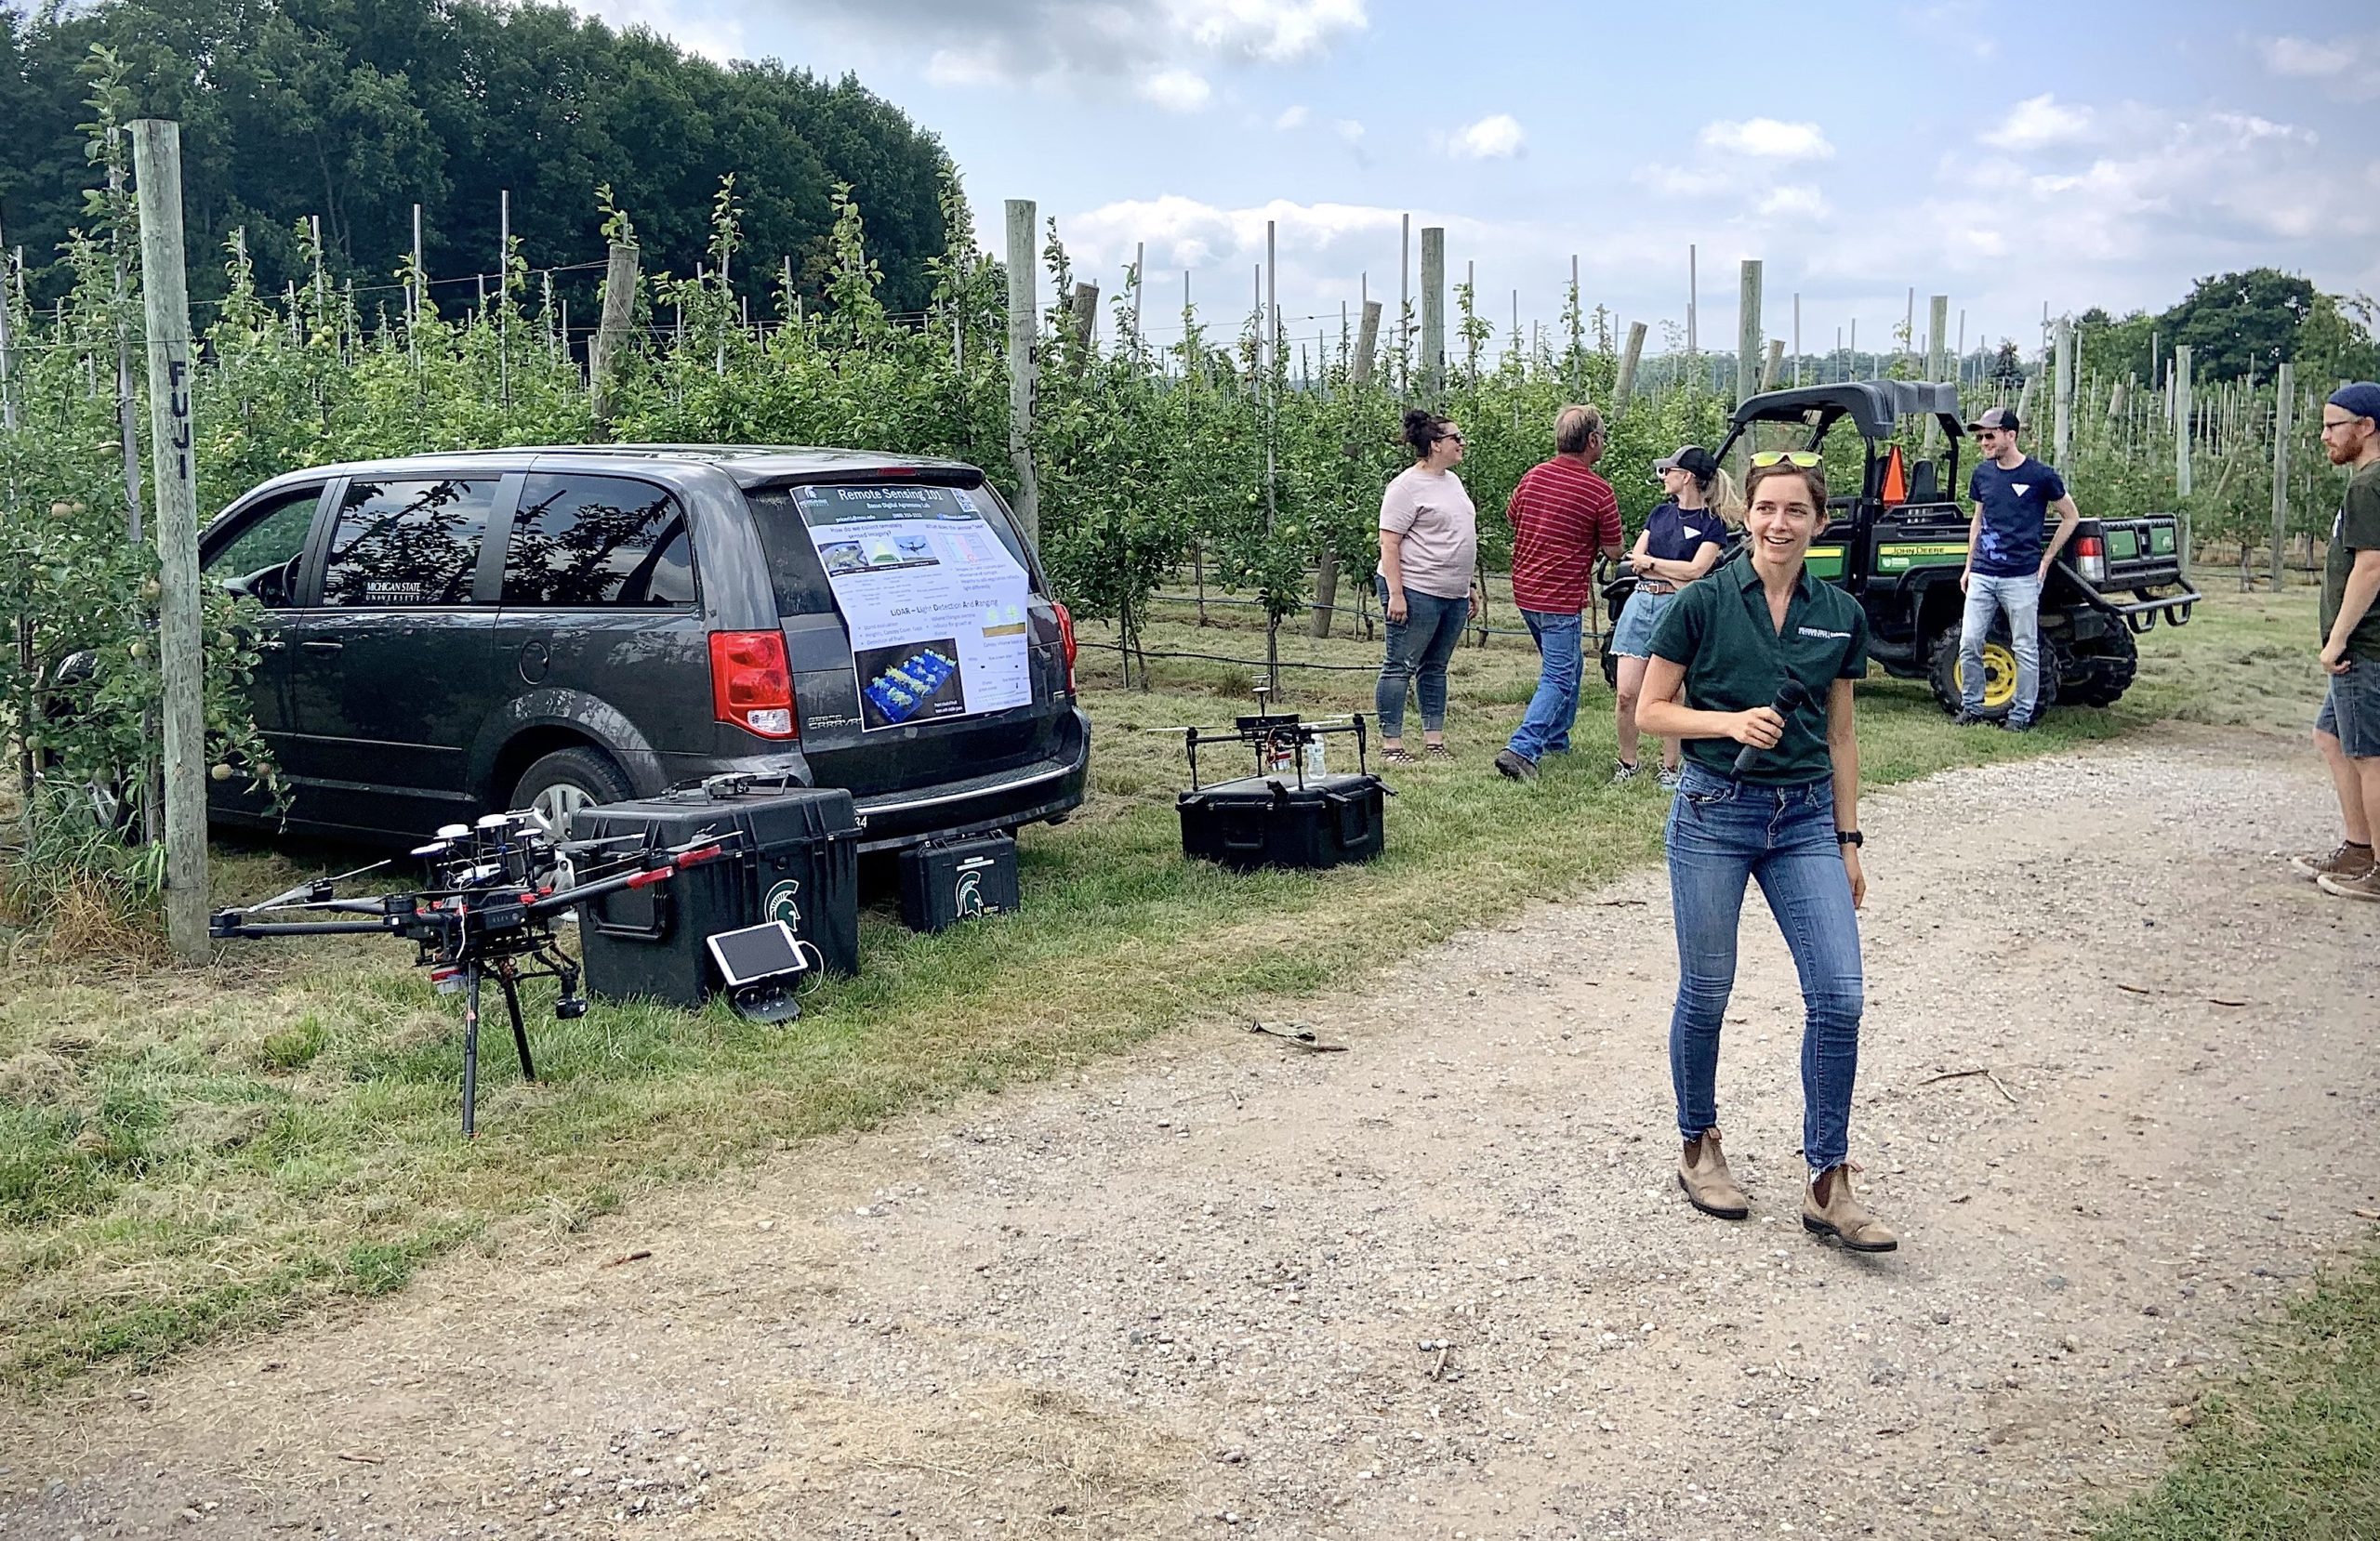 Anna Wallis, an apple production specialist for Michigan State University, led a session with presentations from several companies with products and data analysis services for precision agriculture. 